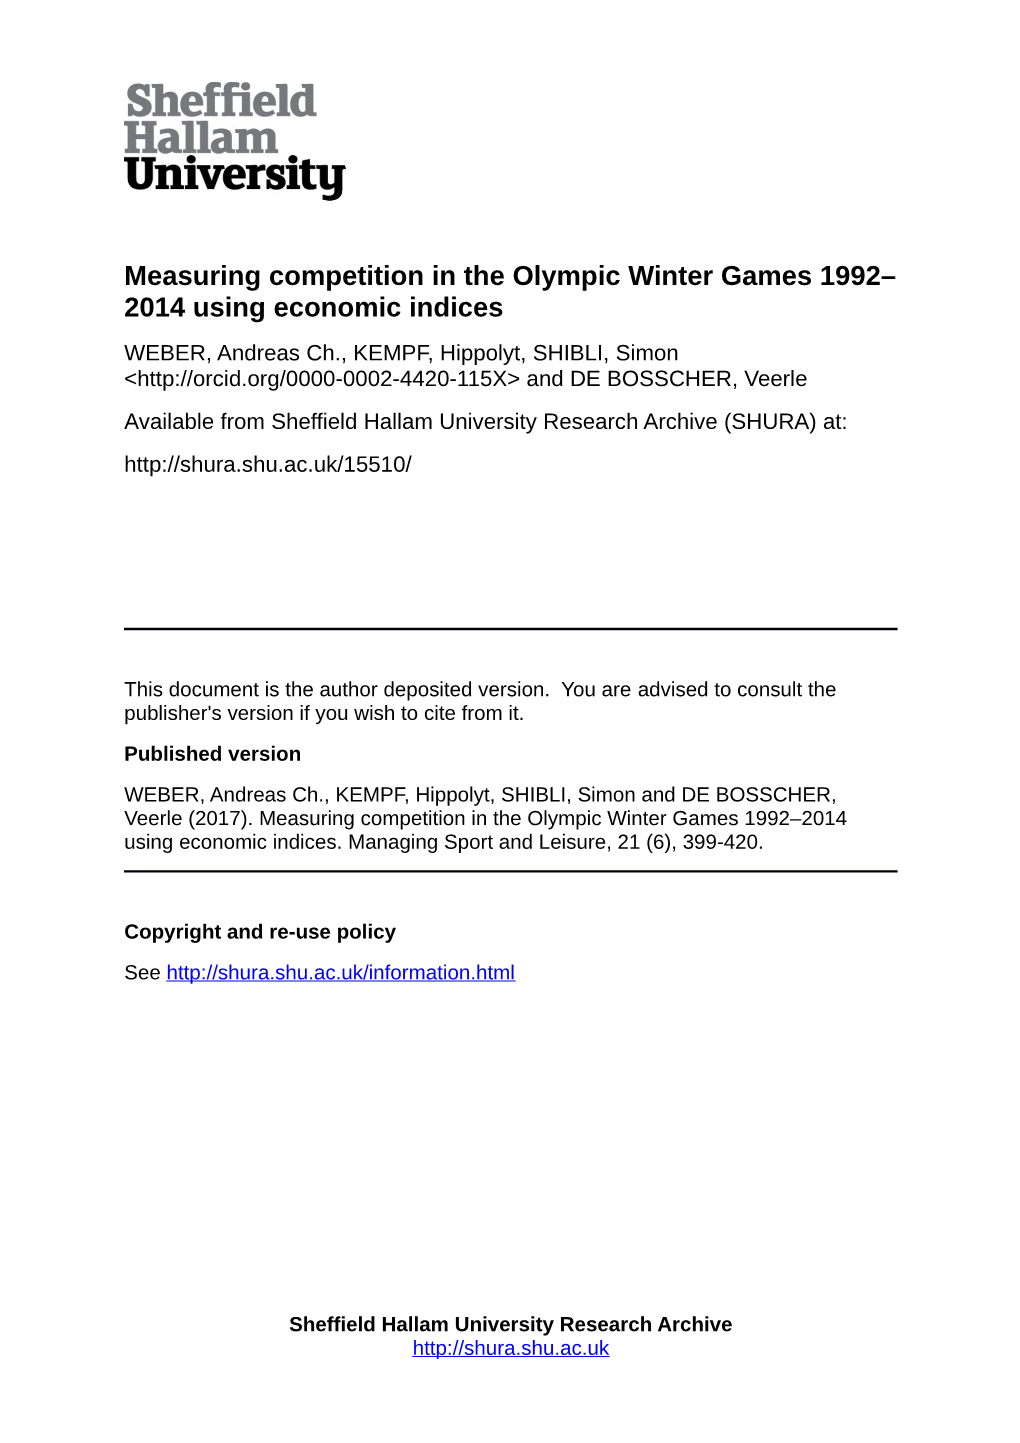 Measuring Competition in the Olympic Winter Games 1992– 2014 Using